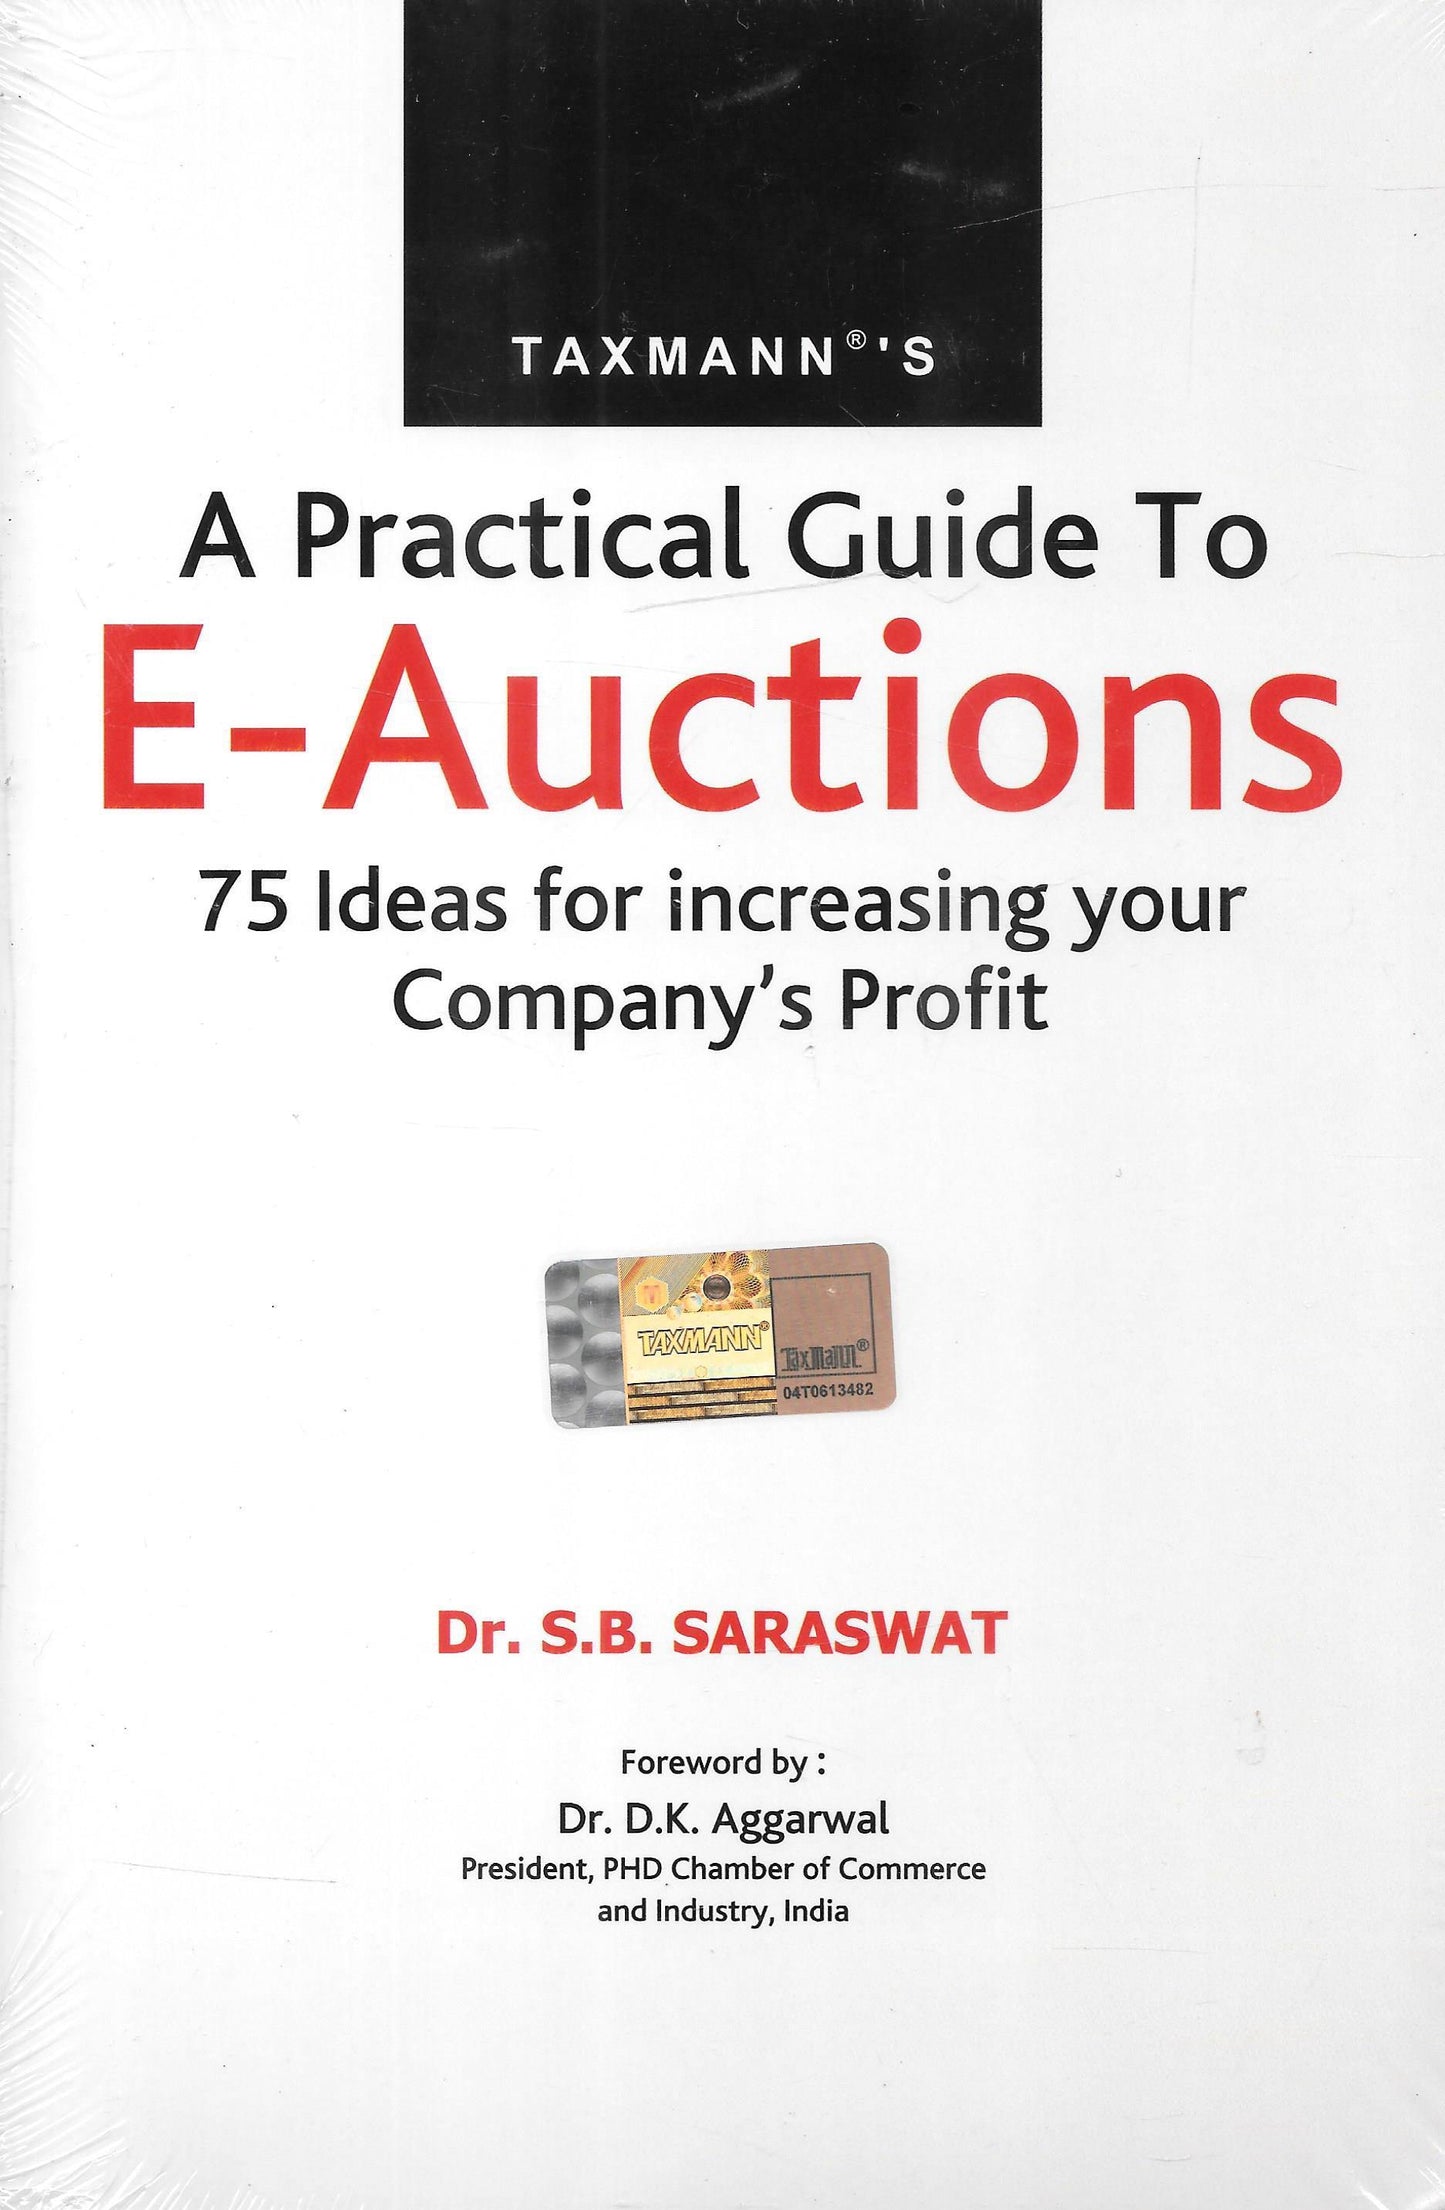 A Practical Guide To E-Auctions